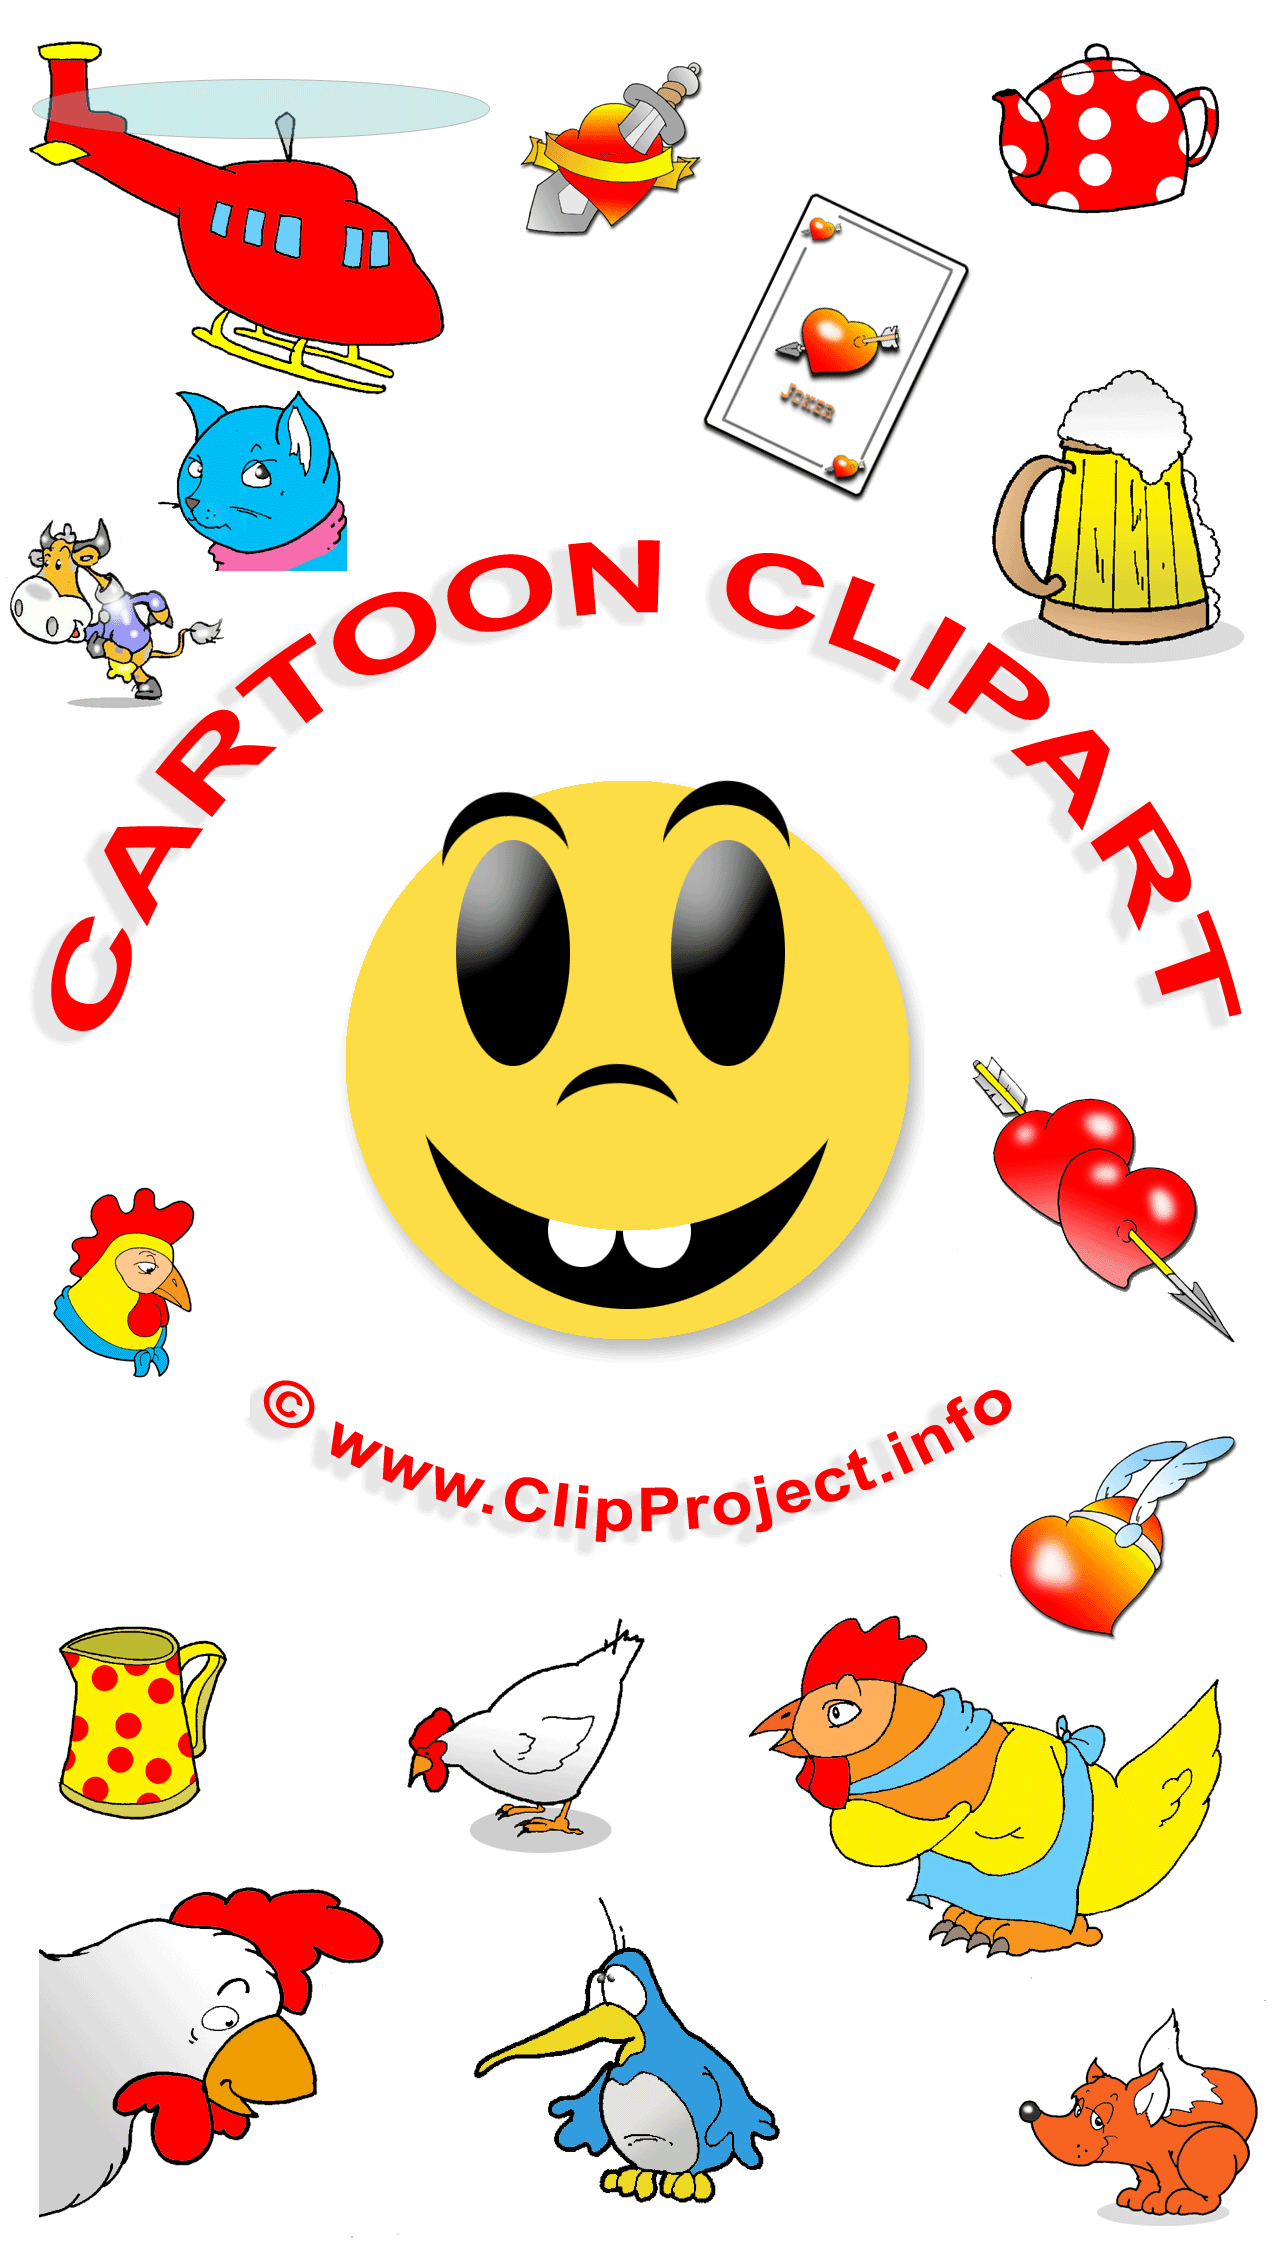 clipart gallery online - photo #6